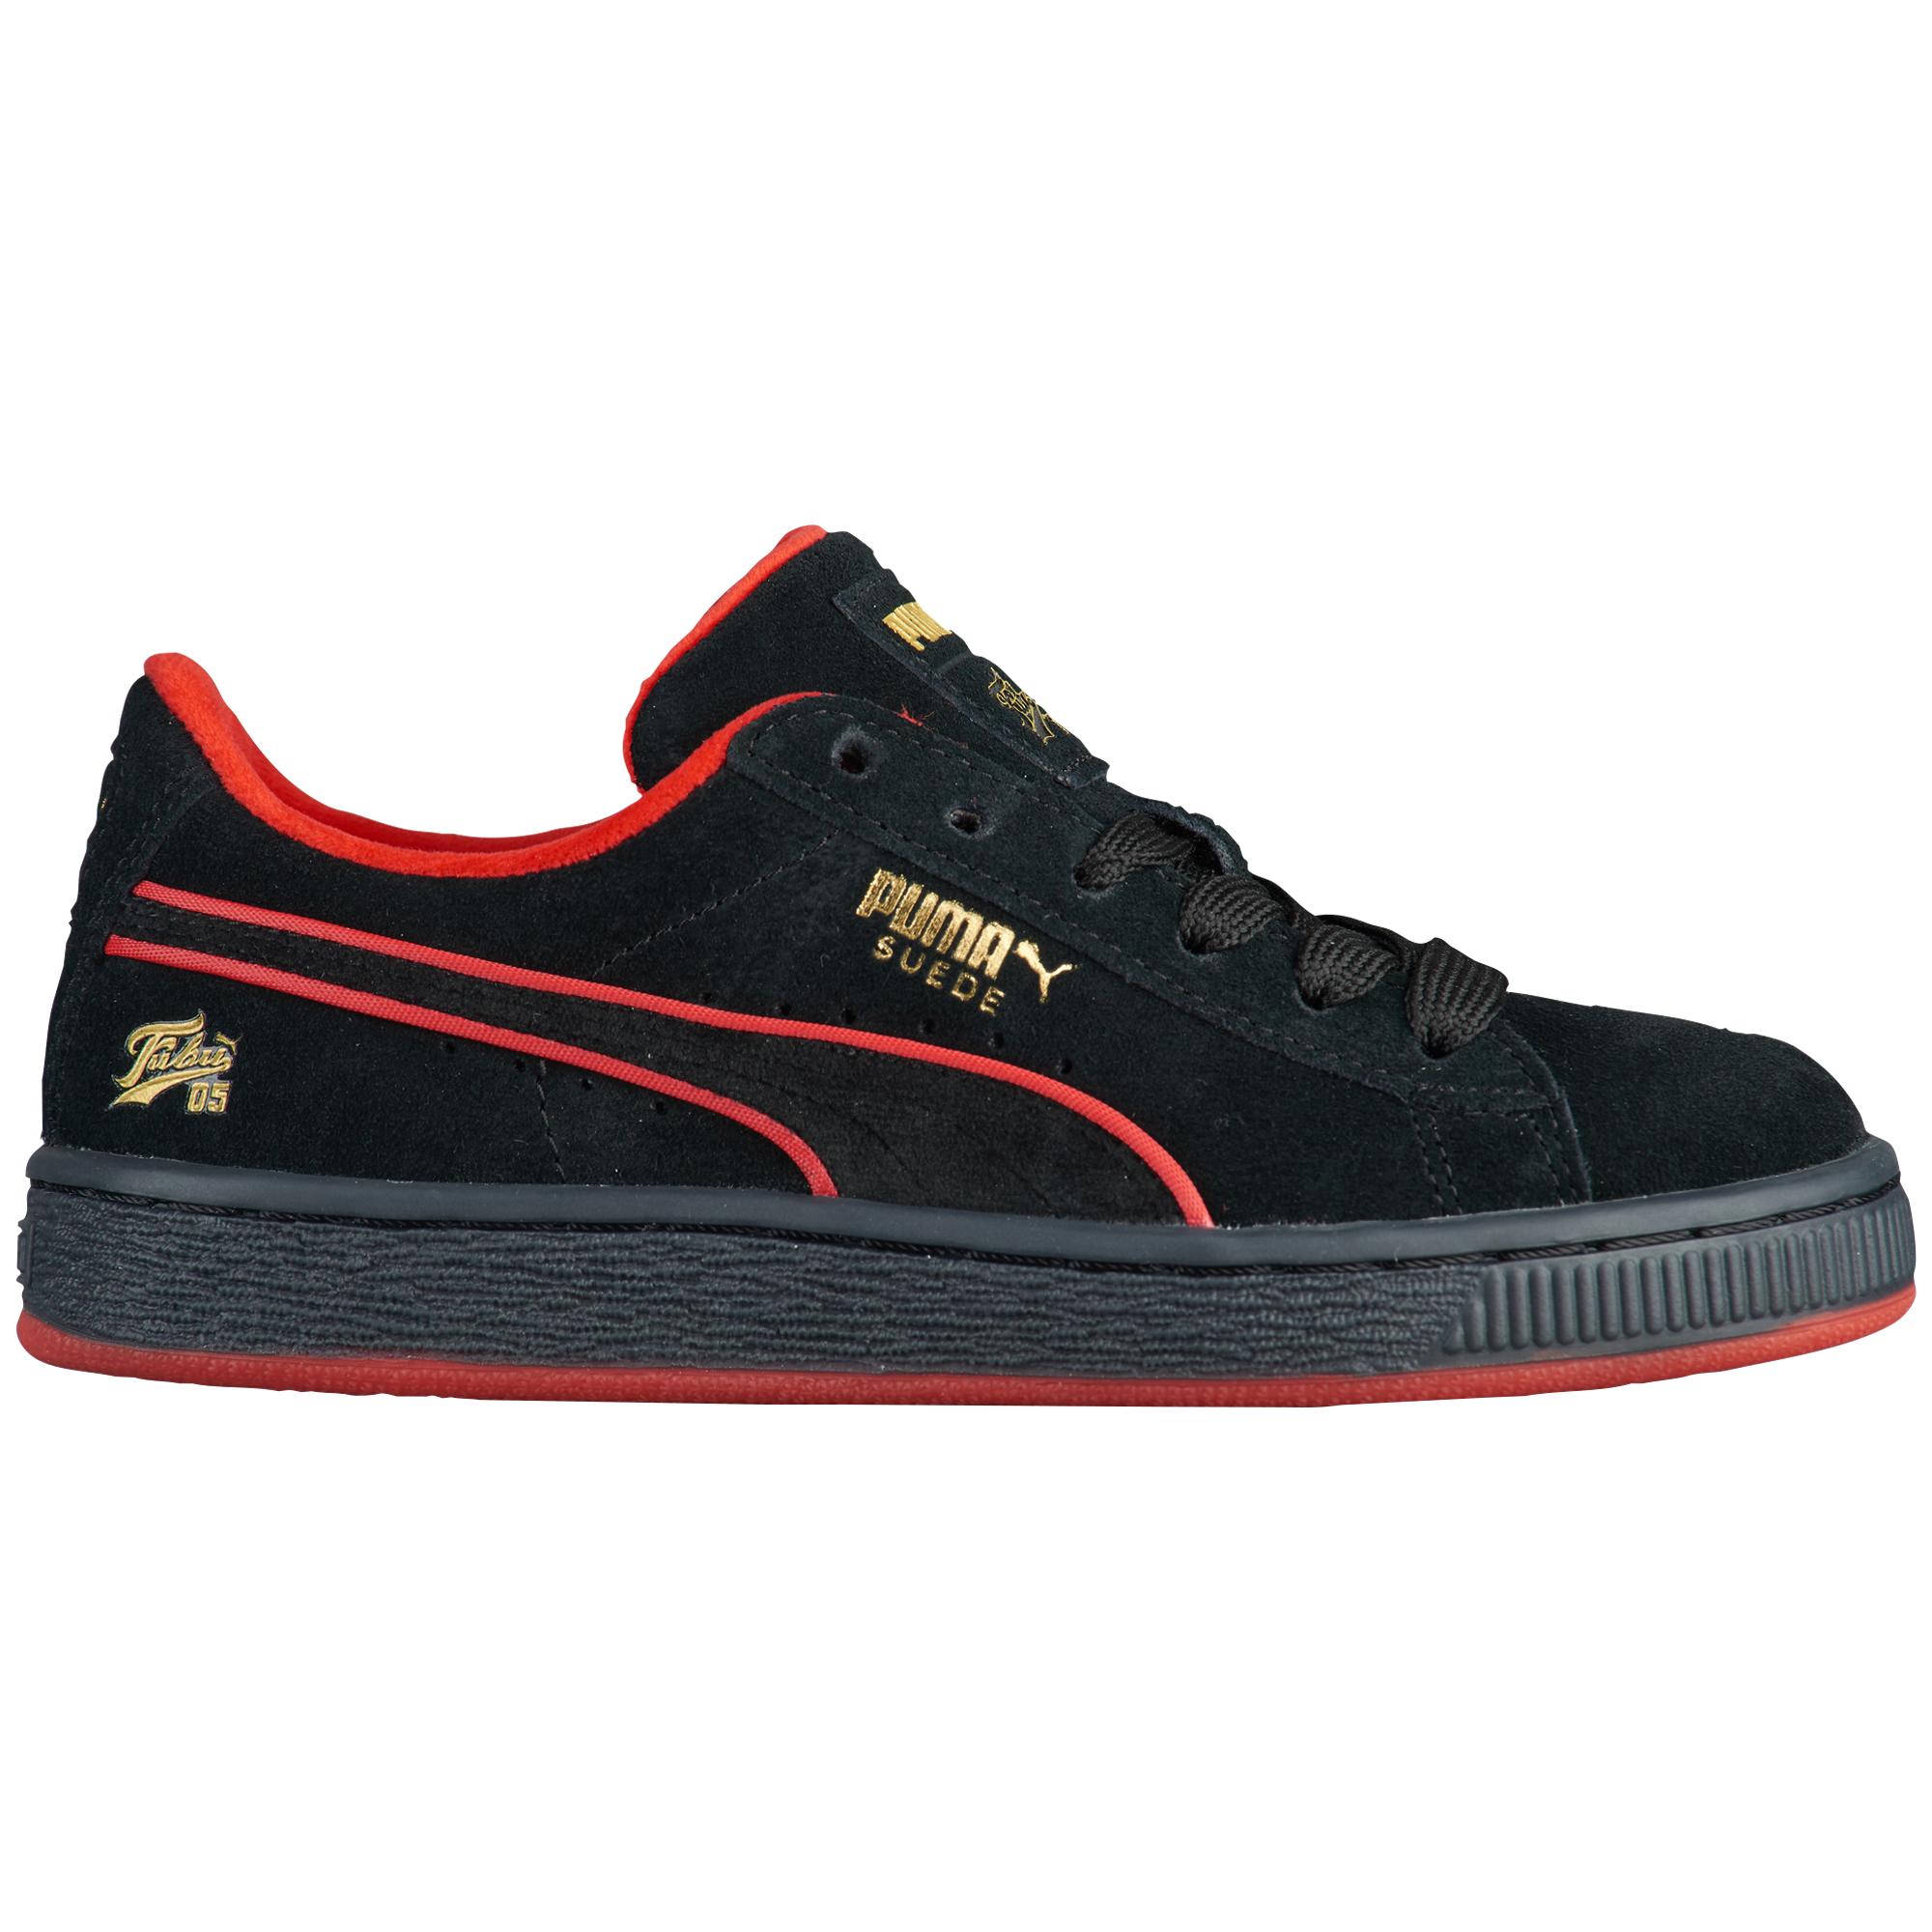 PUMA Suede Classic Basketball Shoes in Black for Men - Lyst